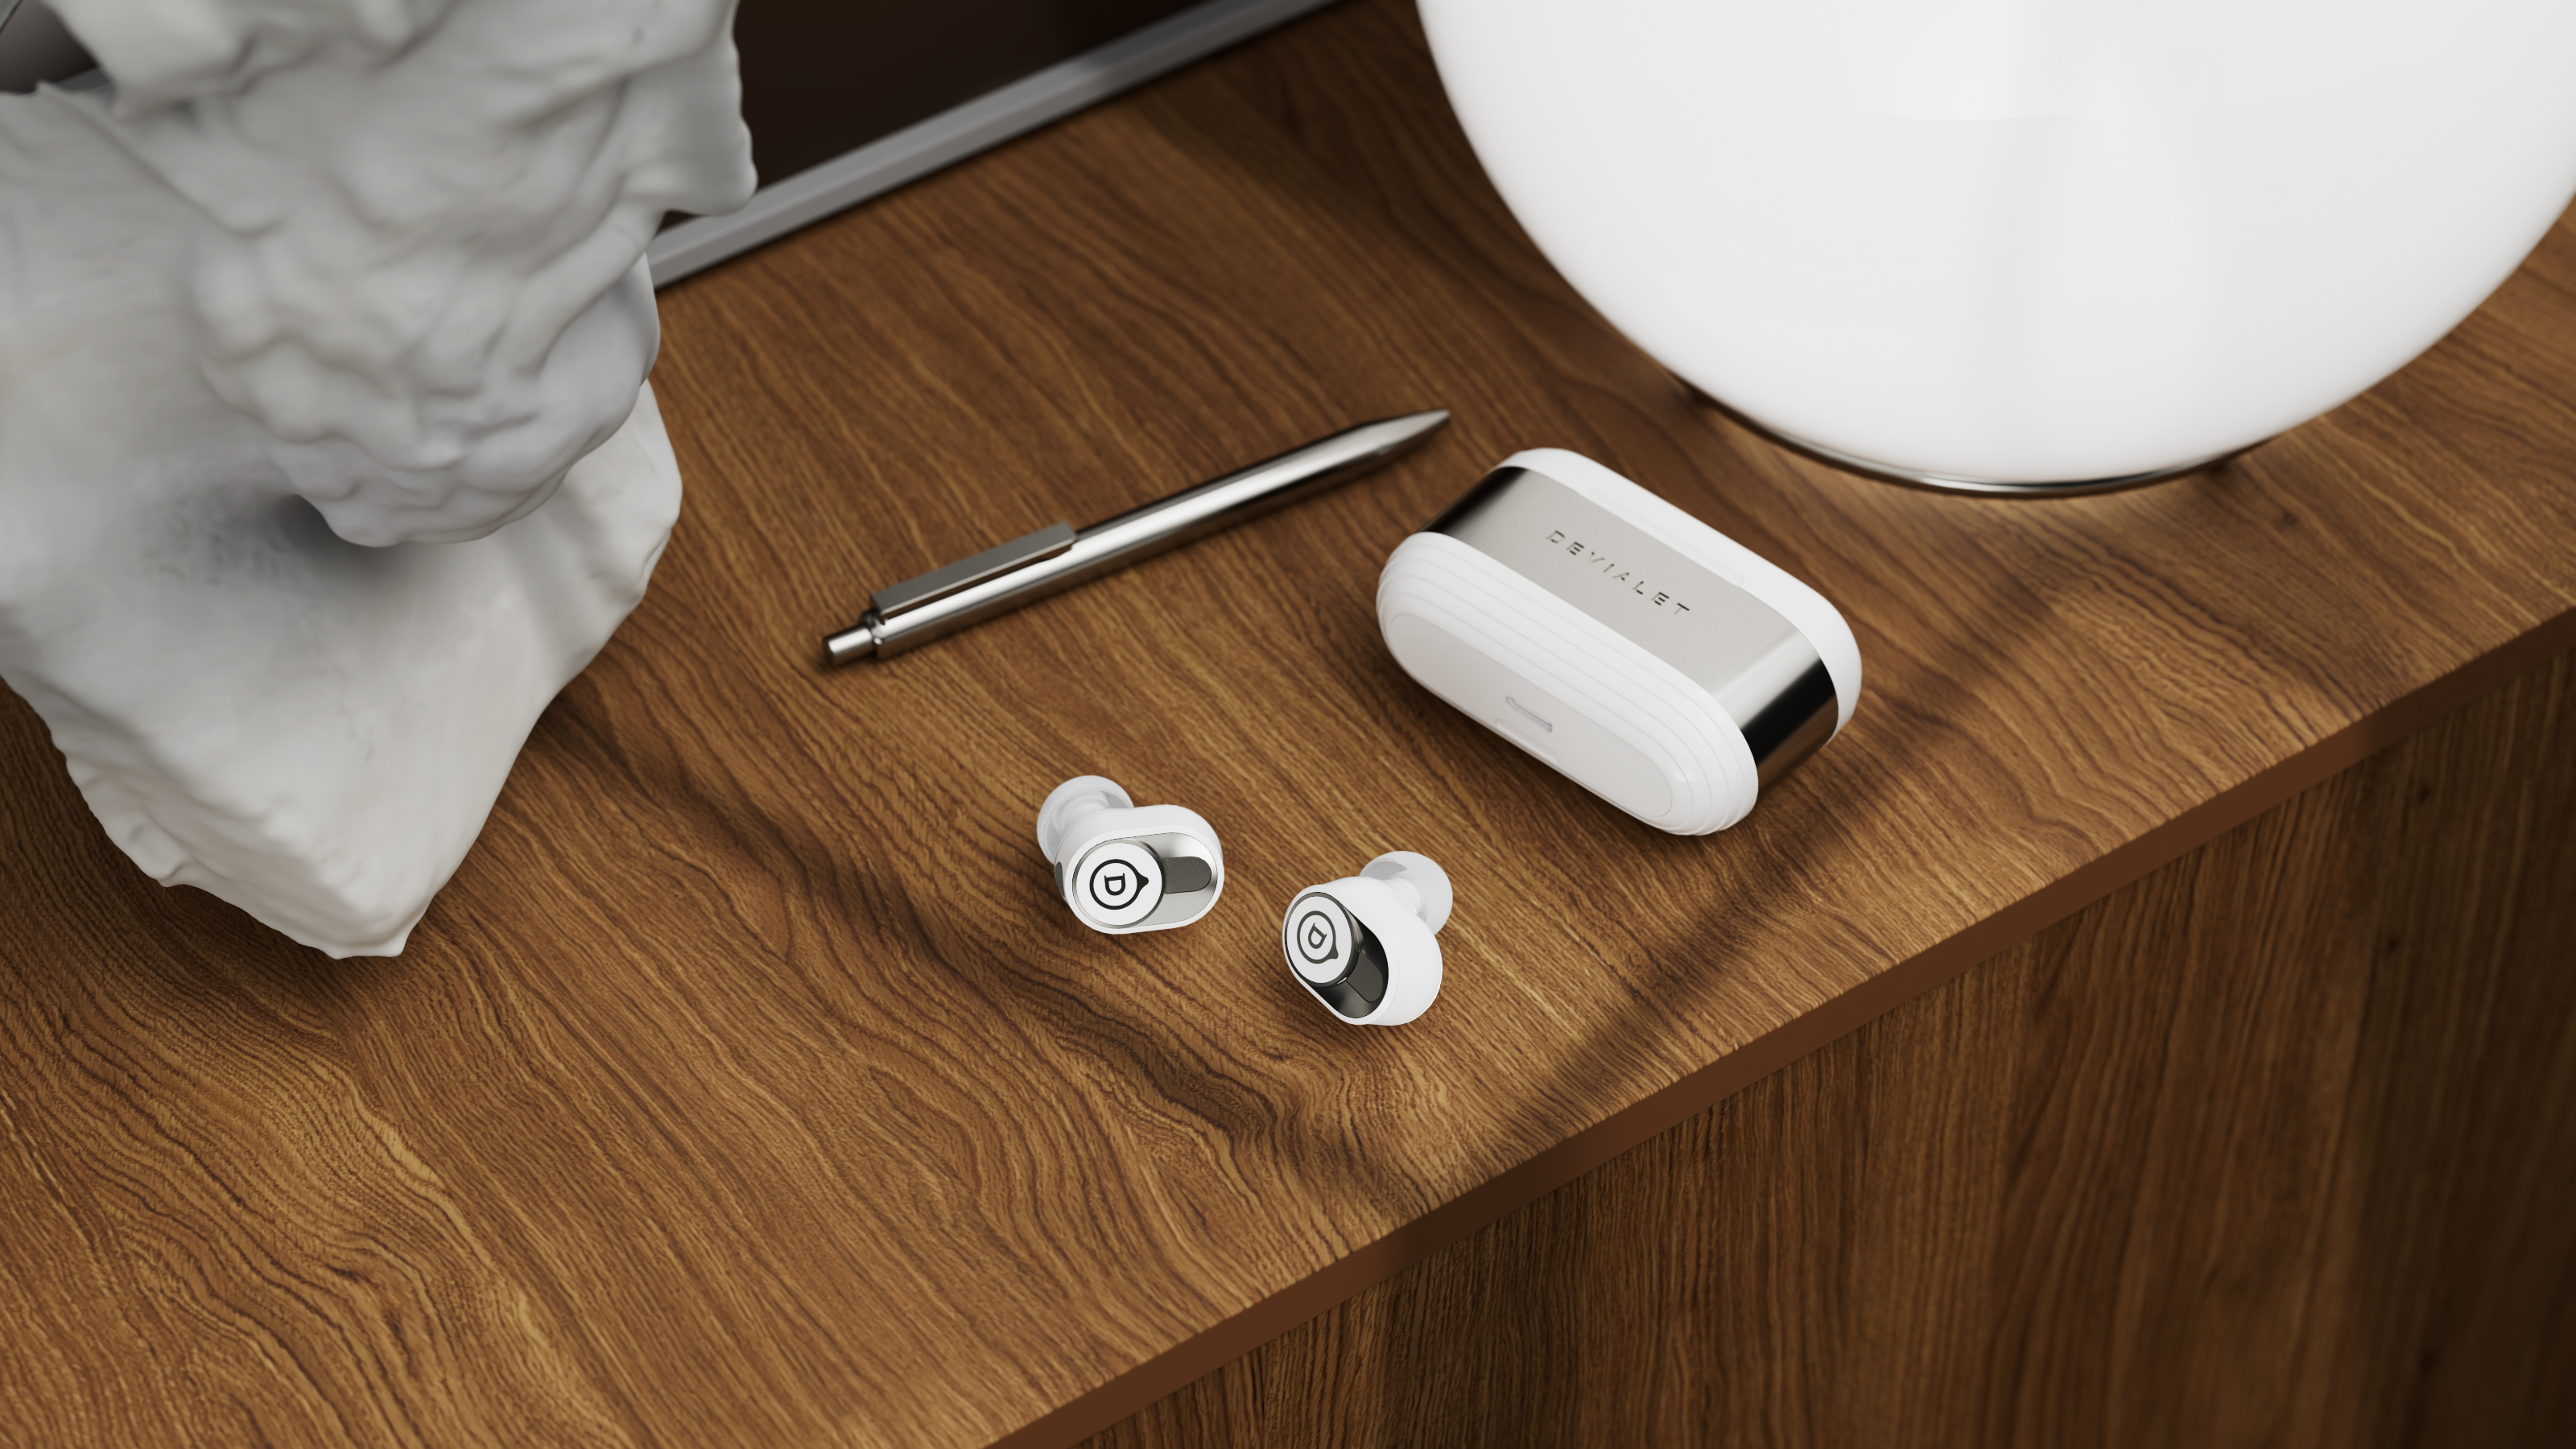 Devialet launches a new pair of high-end wireless earbuds